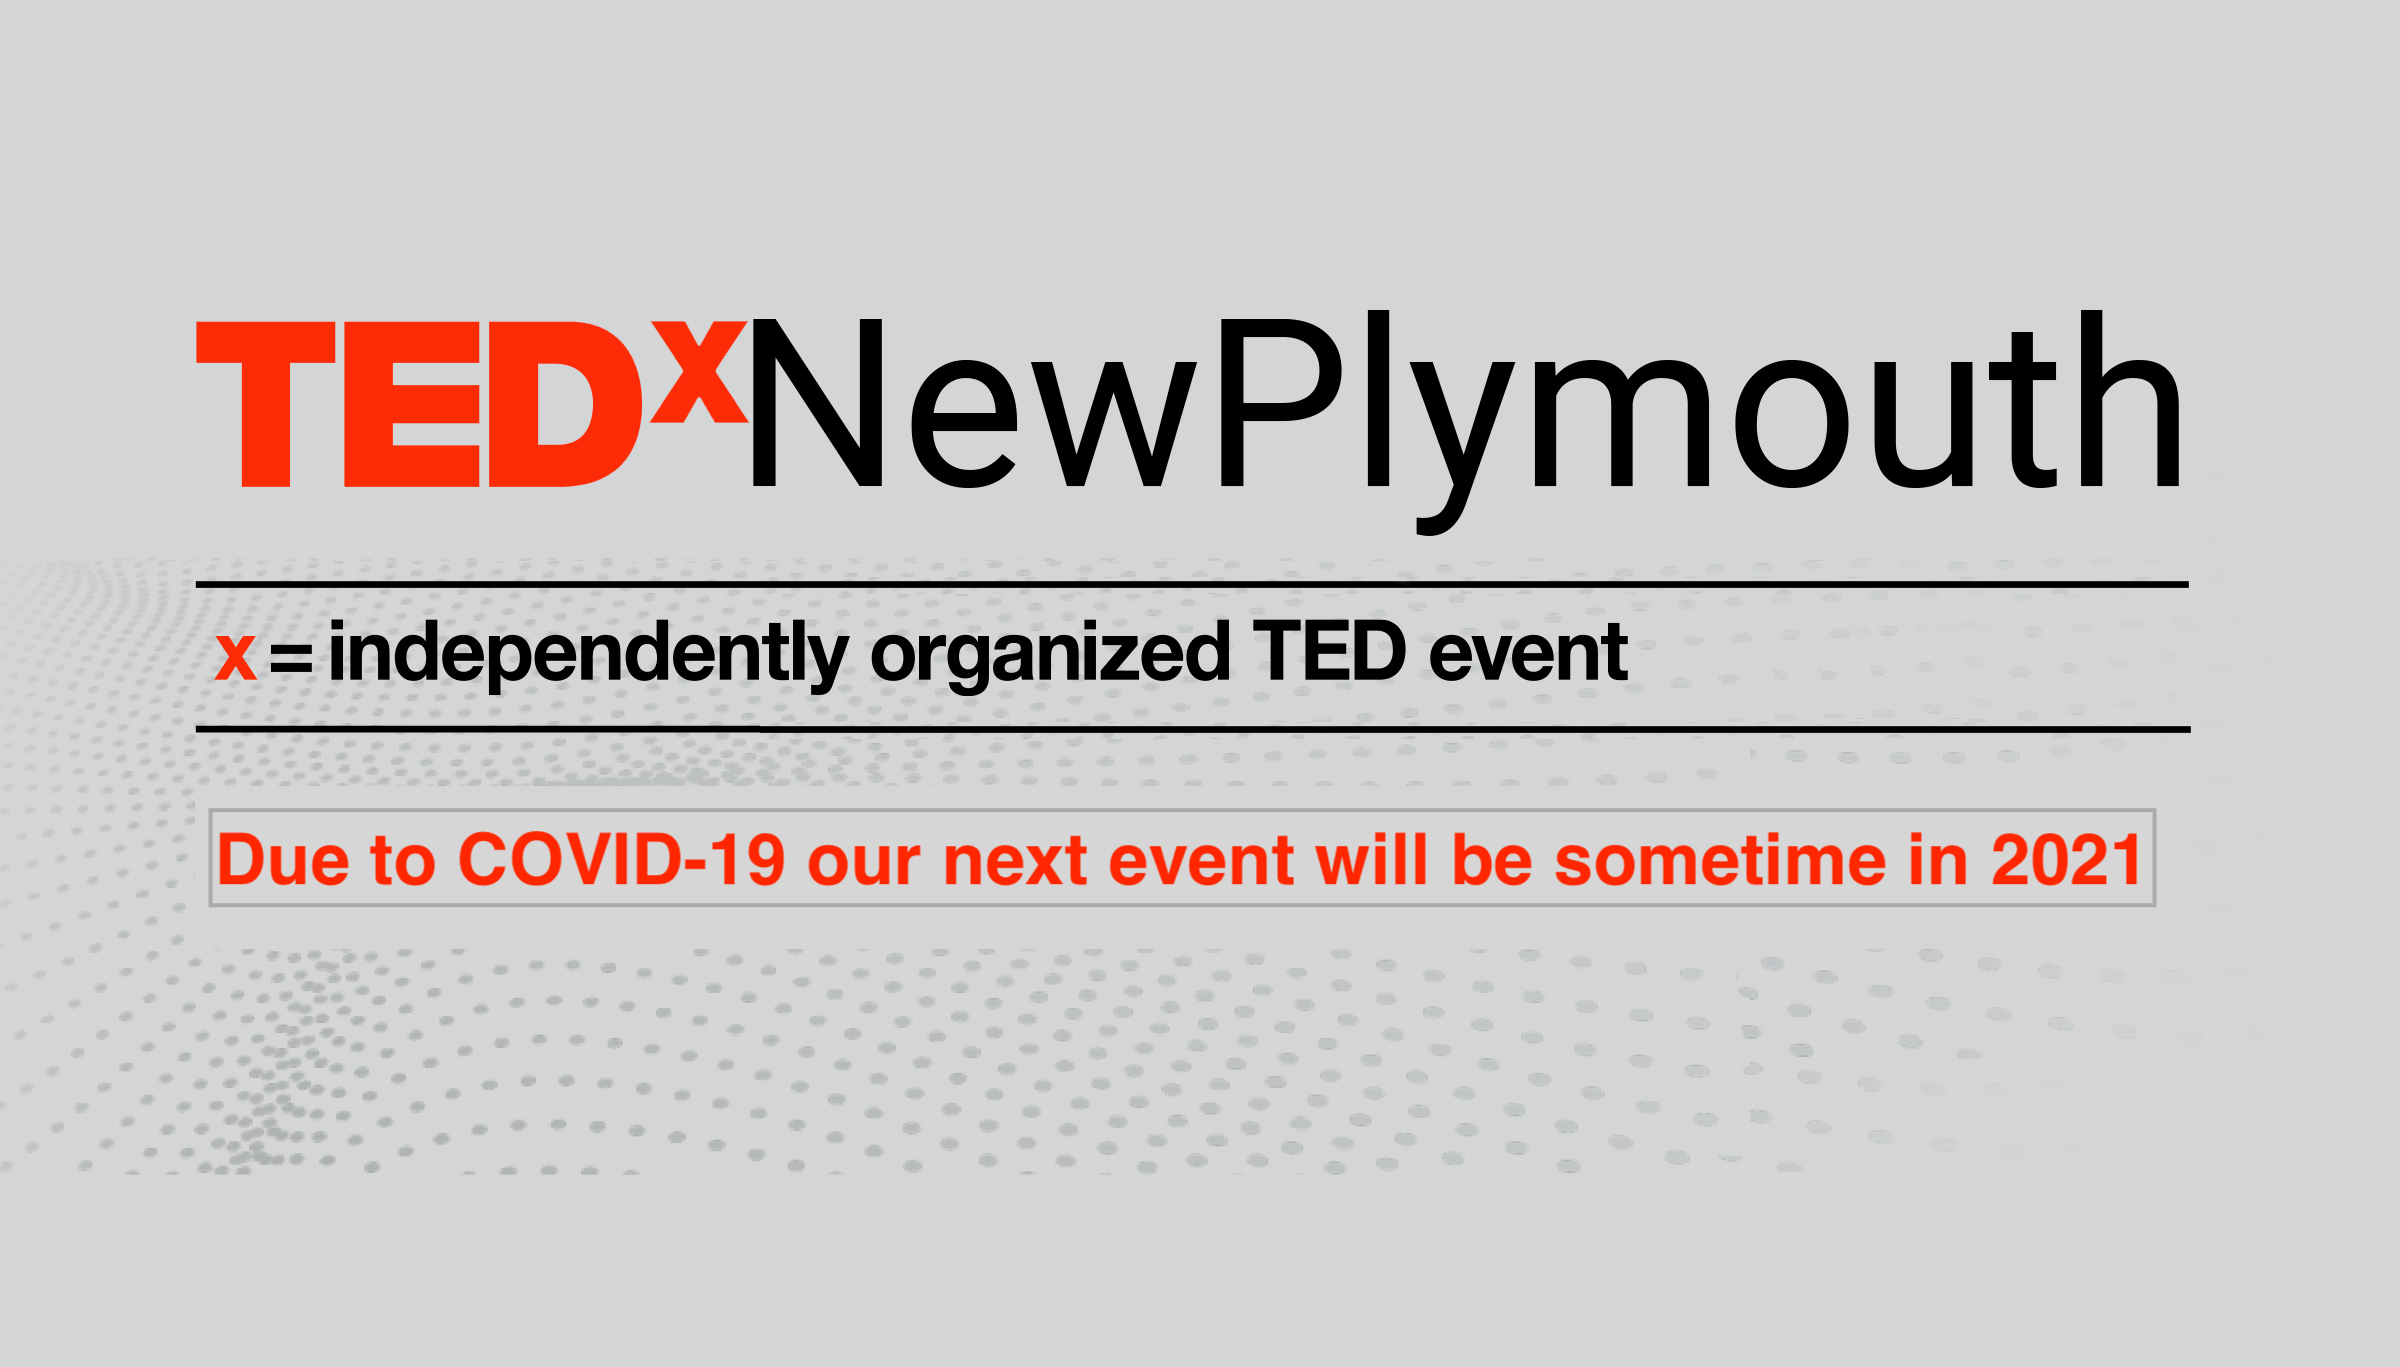 TEDxNewPlymouth - x = independently organized TED event - Next Event Sometime in 2021